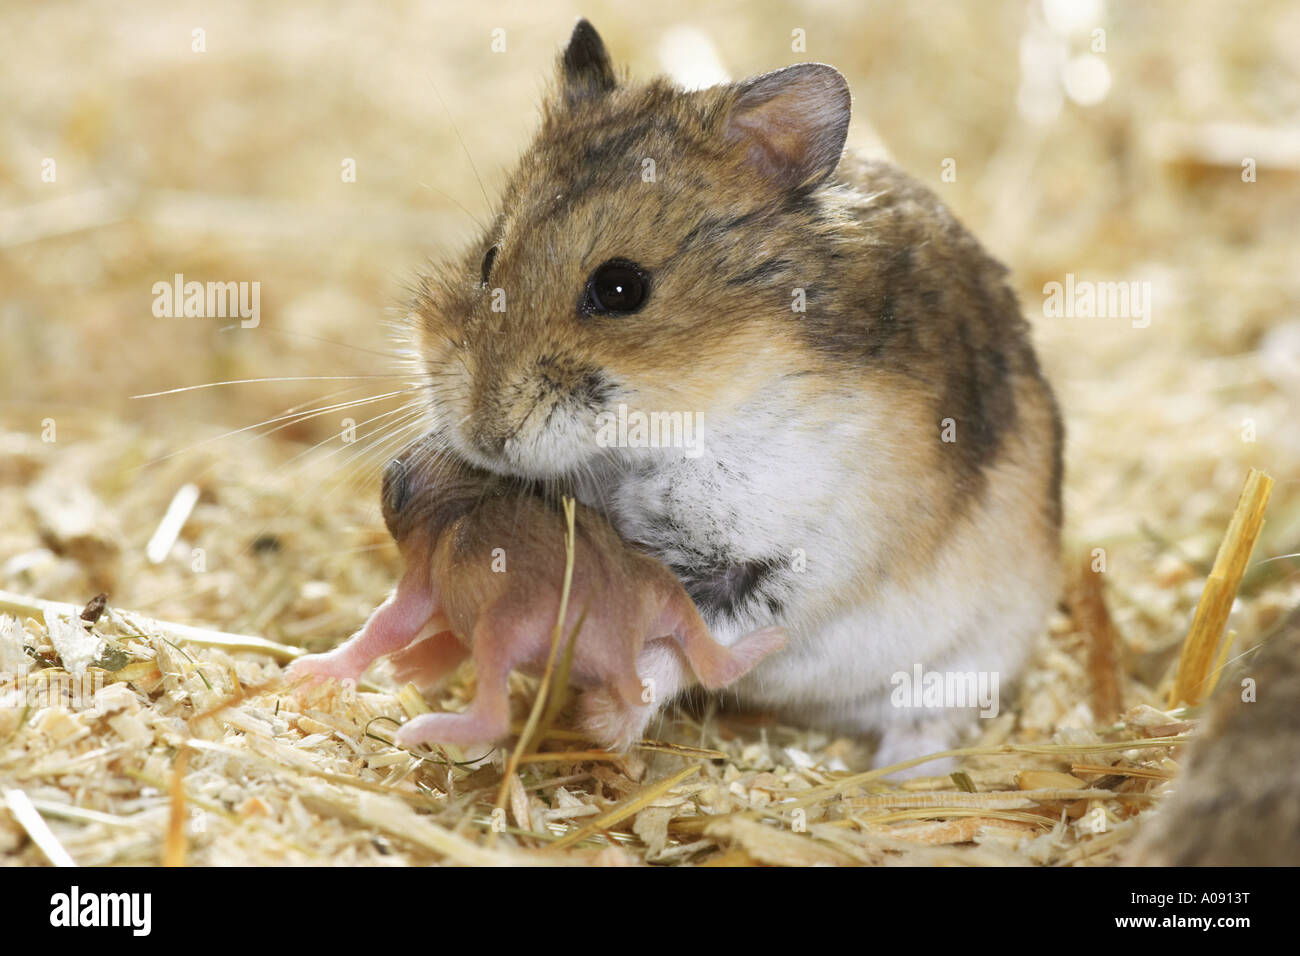 Campbell Dwarf Hamster Eating Peanuts Moss Covered Ground Rodent Has Stock  Photo by ©iwayansumatika 547374476